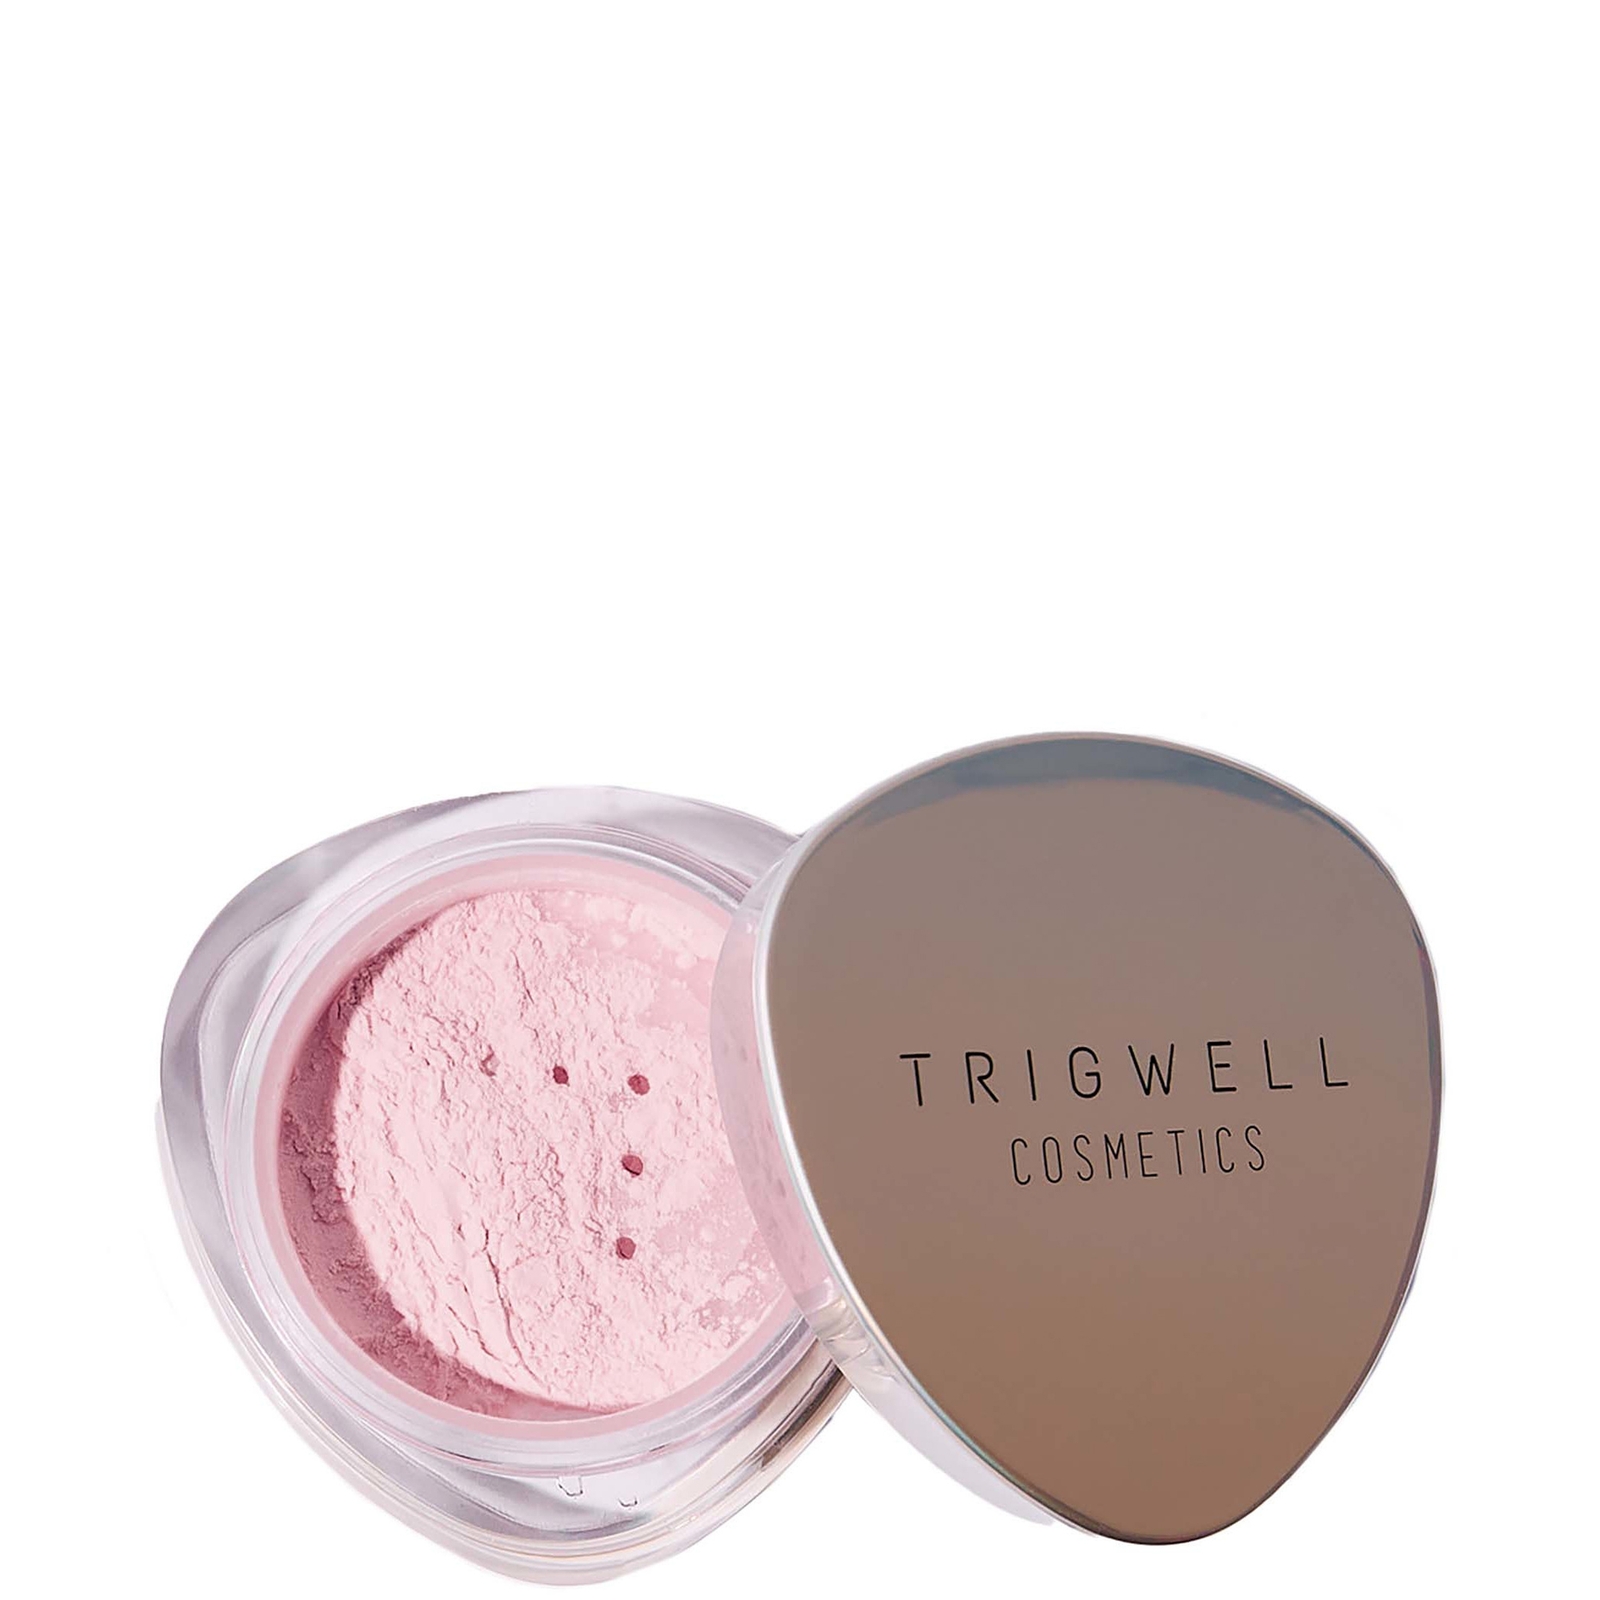 Image of Trigwell Cosmetics Velvet Setting Powder 8g (Various Shades) - Pink